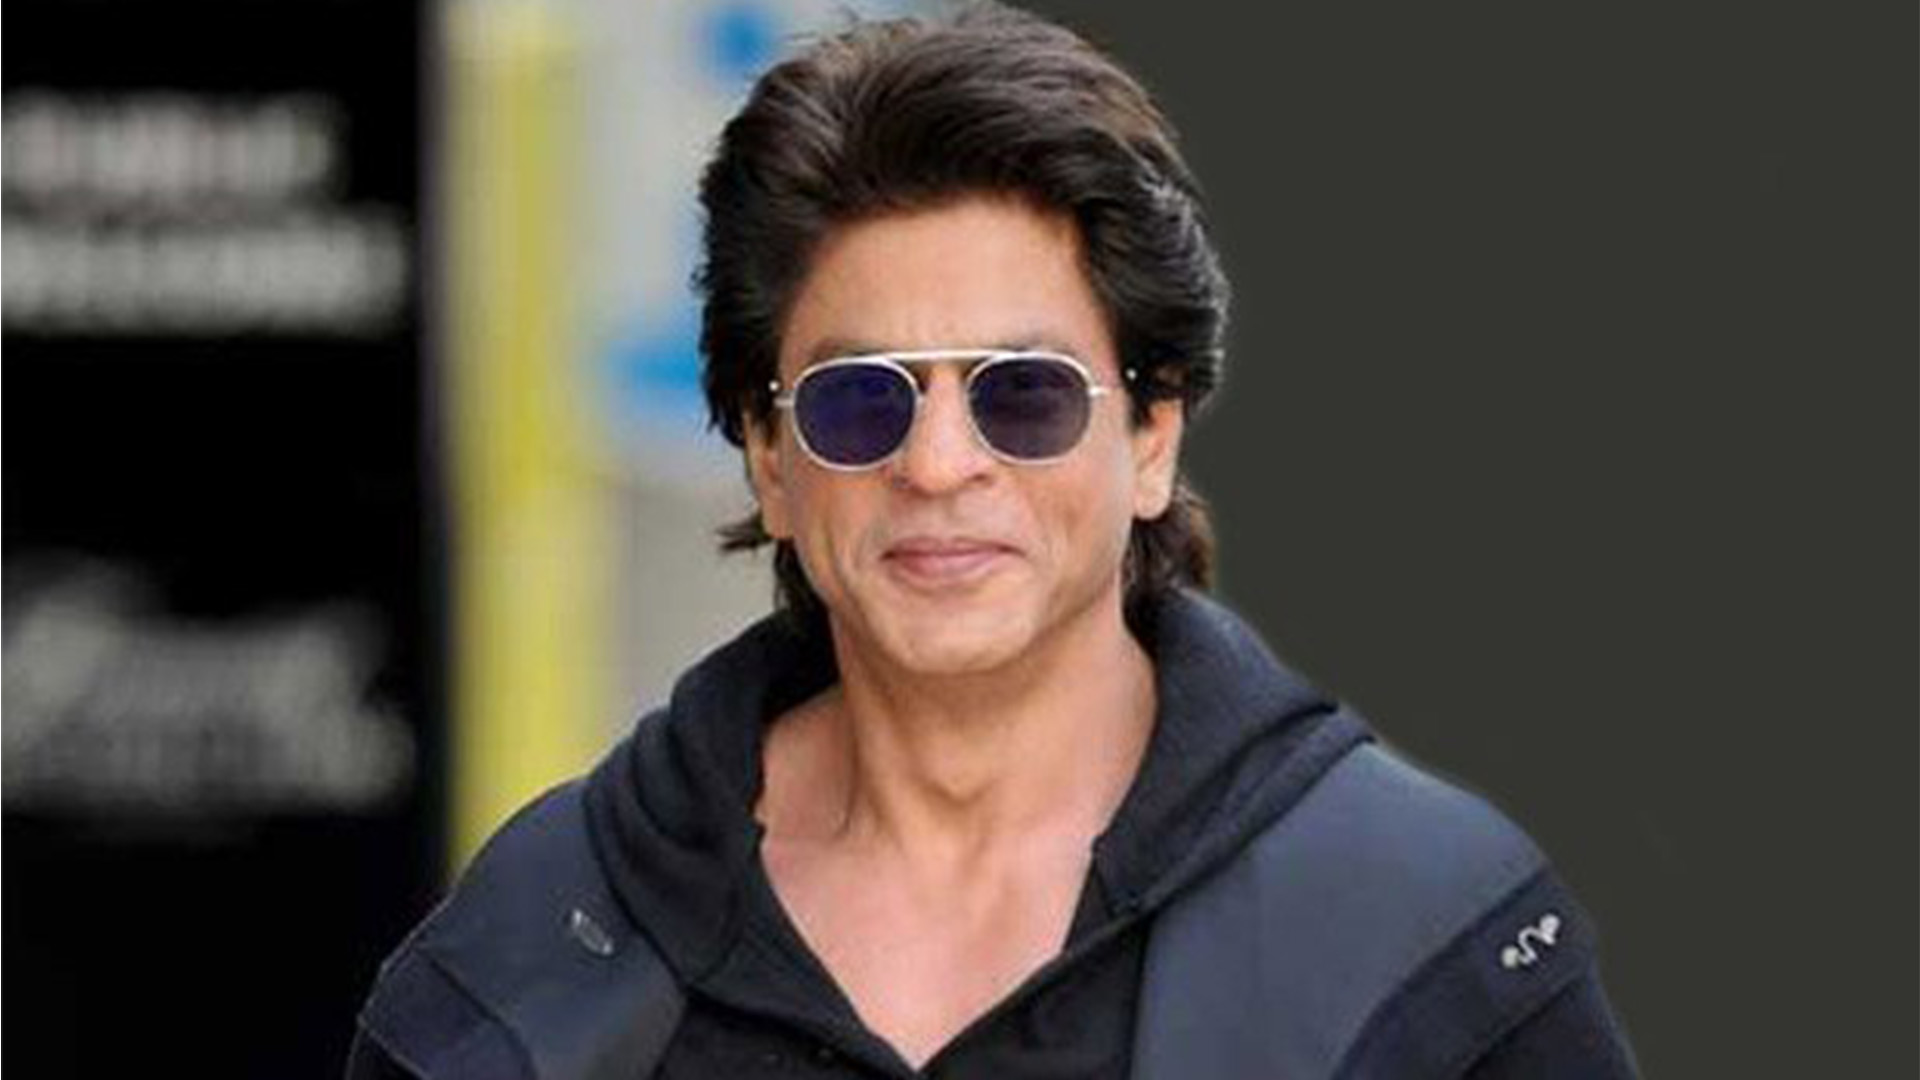 Shah Rukh started shooting for Pathan